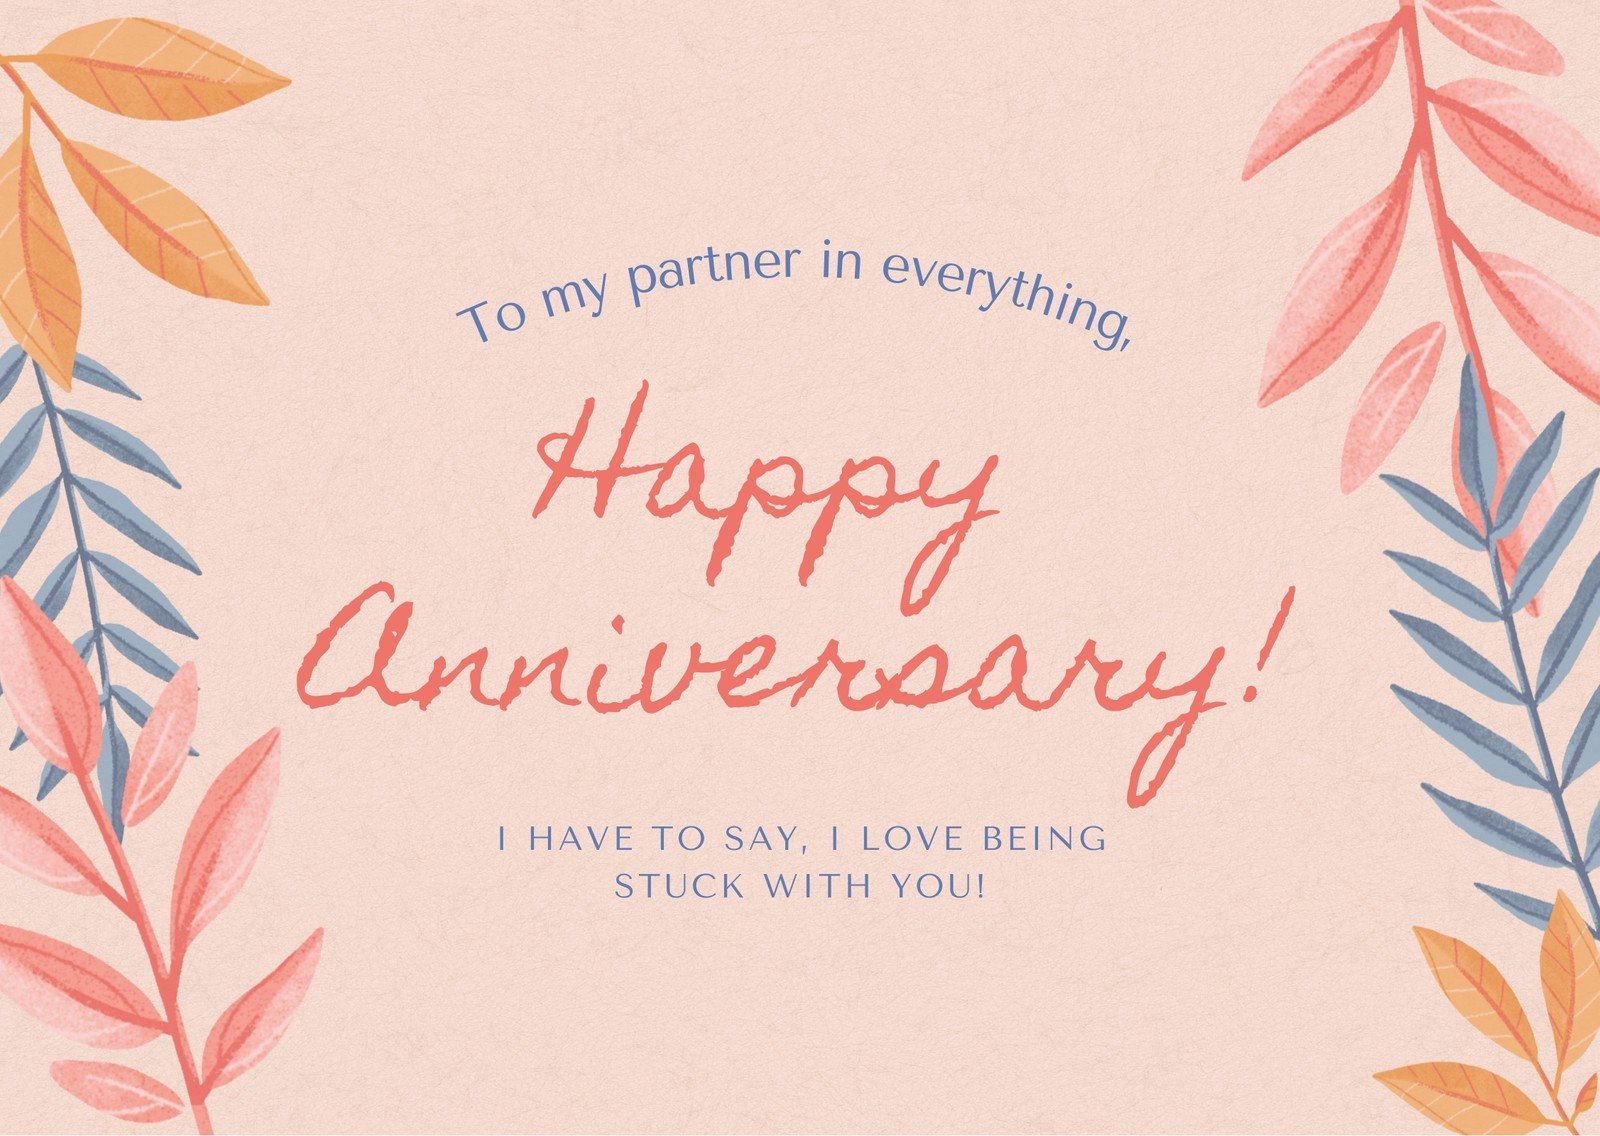 Pink Orange and Blue Delicate Floral Couple Anniversary Animated Card In Template For Anniversary Card